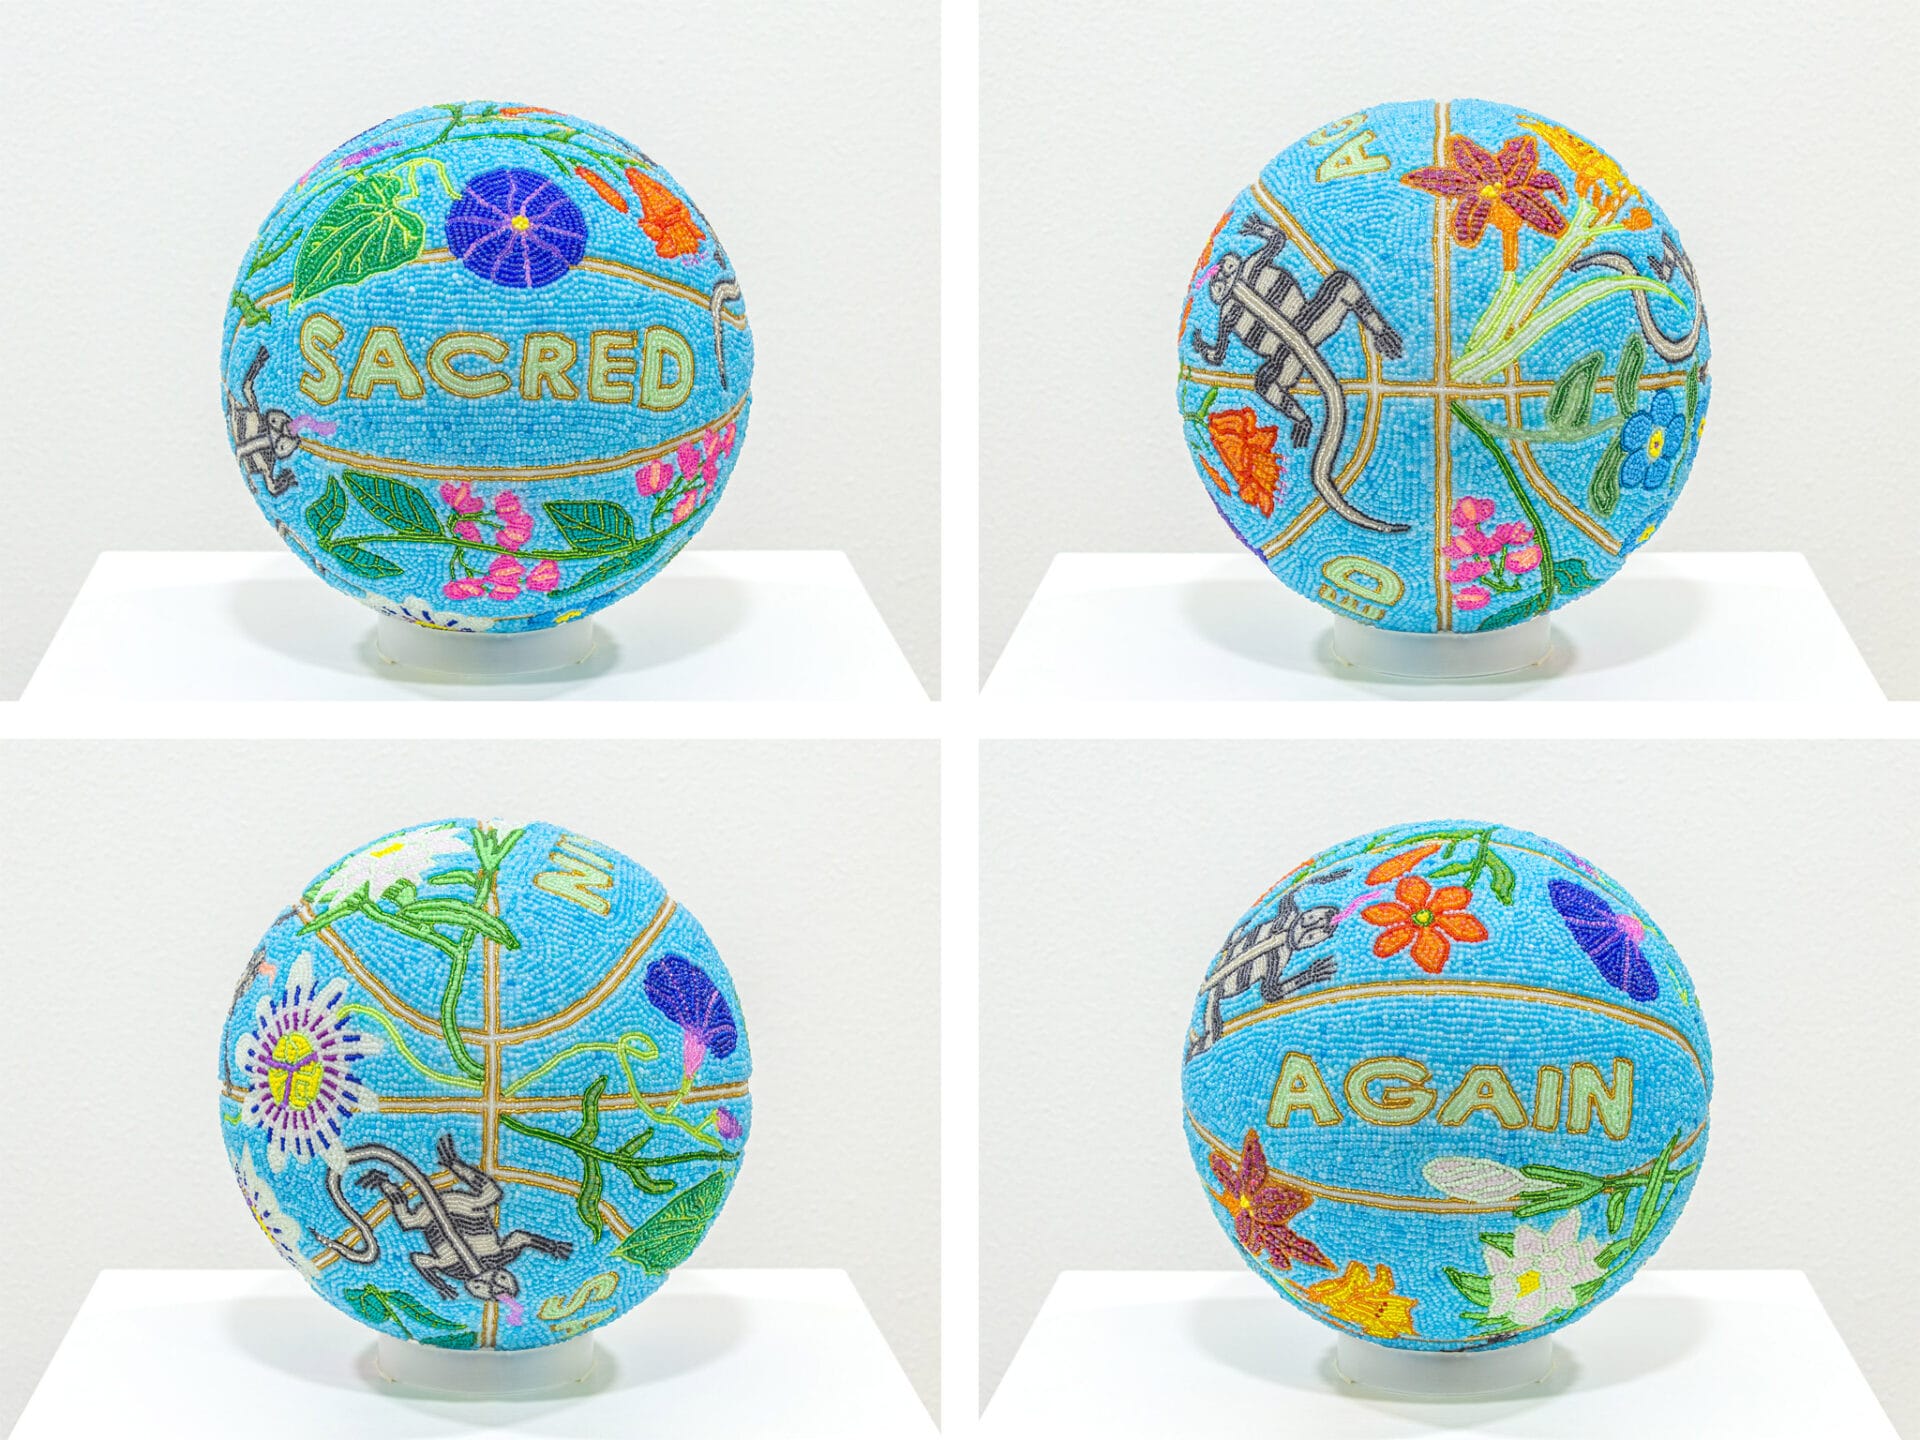 a four-up image of different views of a teal glass bead-coated spherical sculpture made from a basketball depicting the words "sacred" and "again" and various flowers and lizards